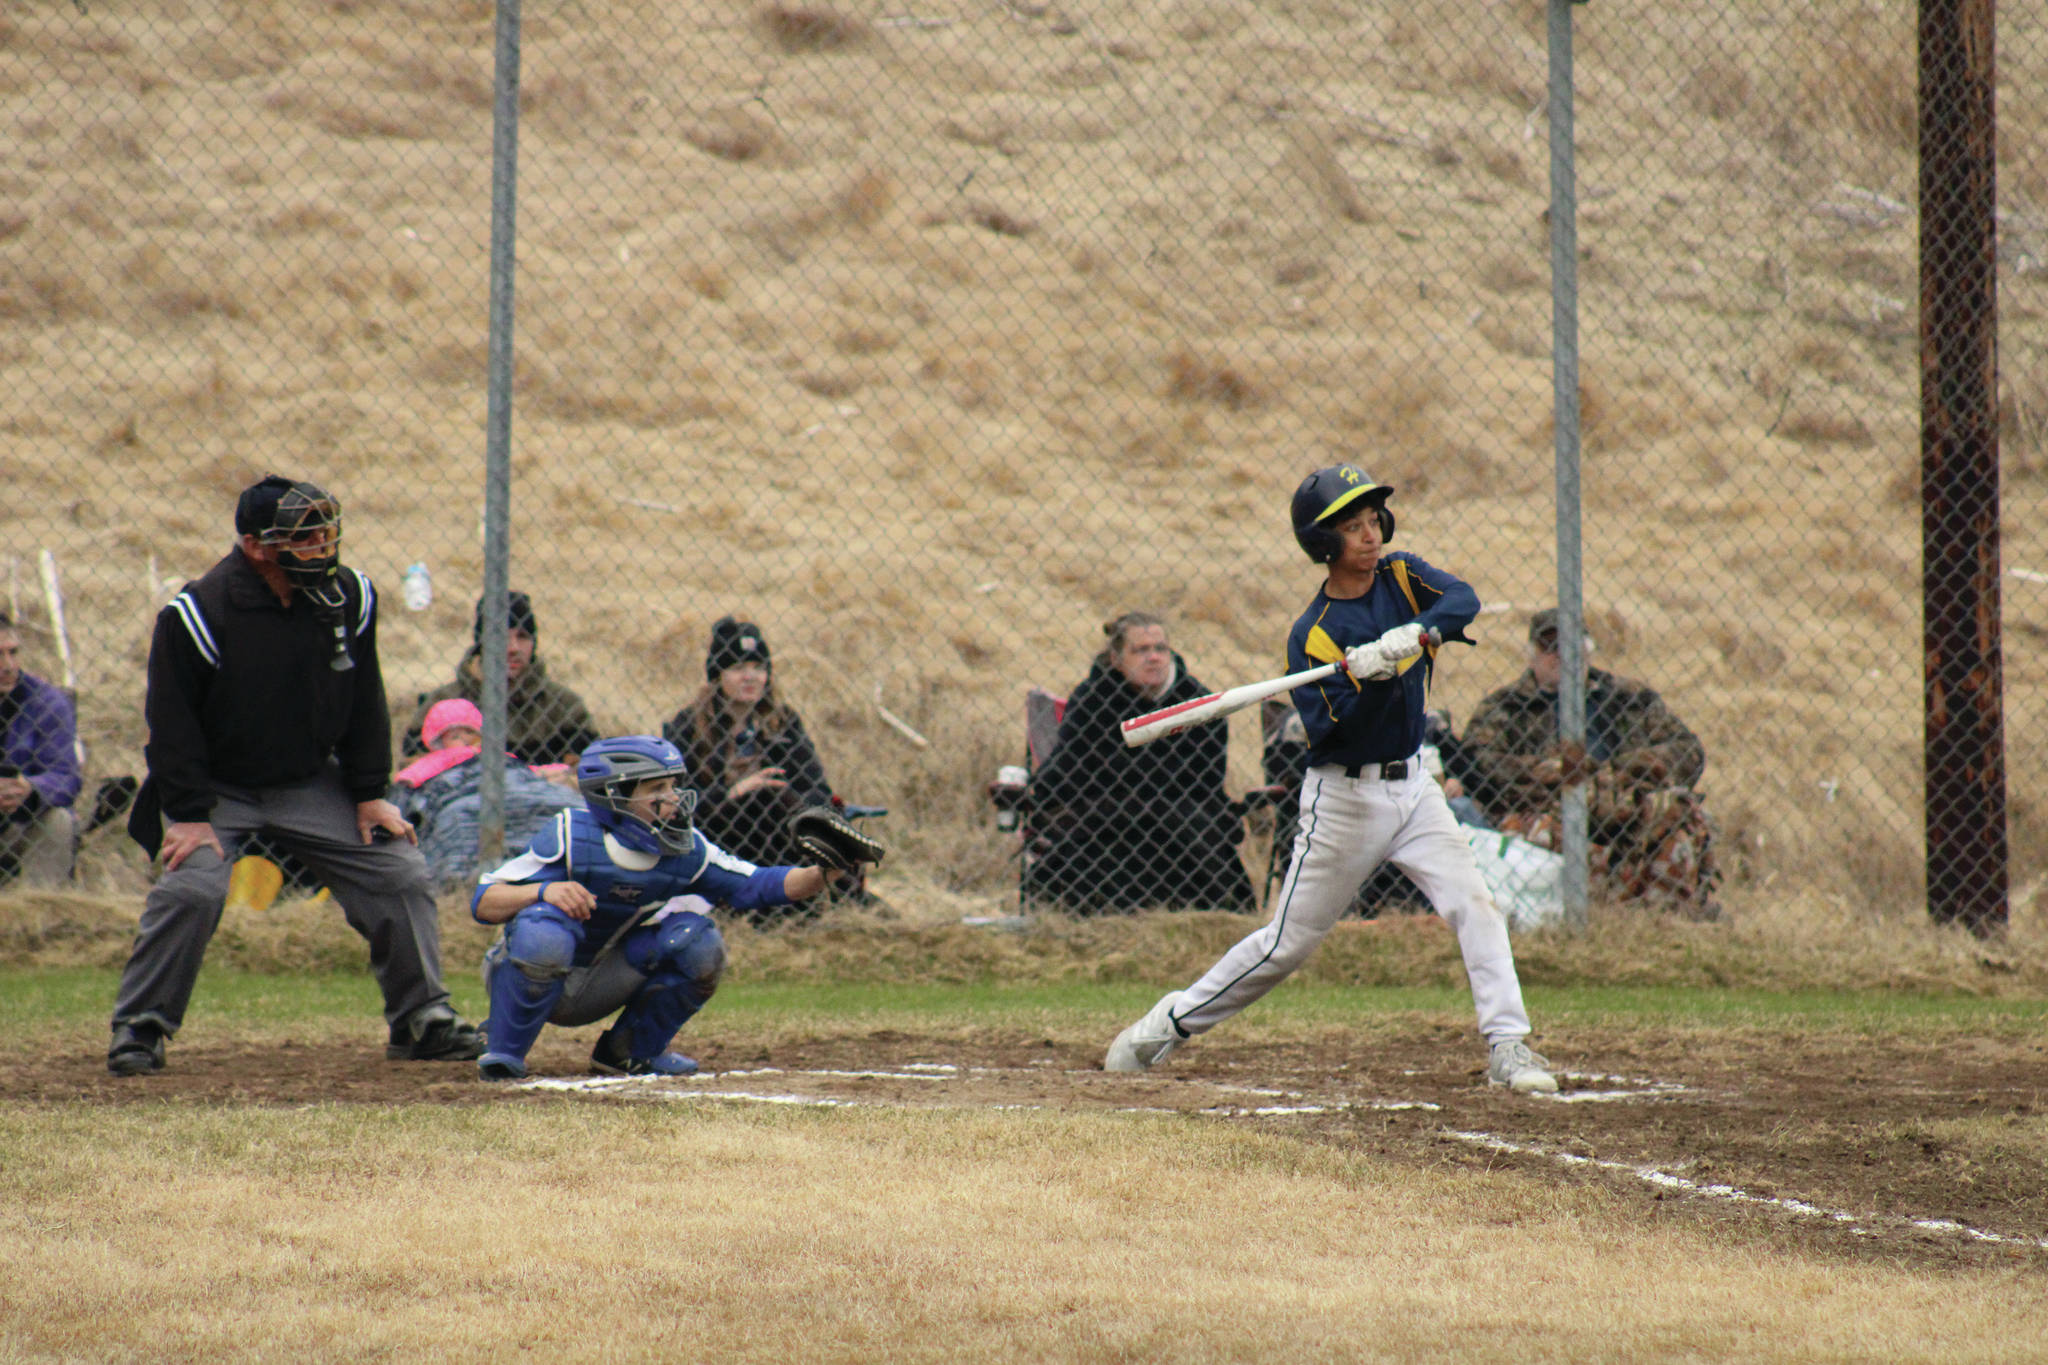 Homer second baseman Mylan Johnson swings at a pitch during a game against Palmer on Saturday, May 8, 2021, in Homer, Alaska. (Photo by Tim Rockey/Mat-Su Valley Frontiersman)